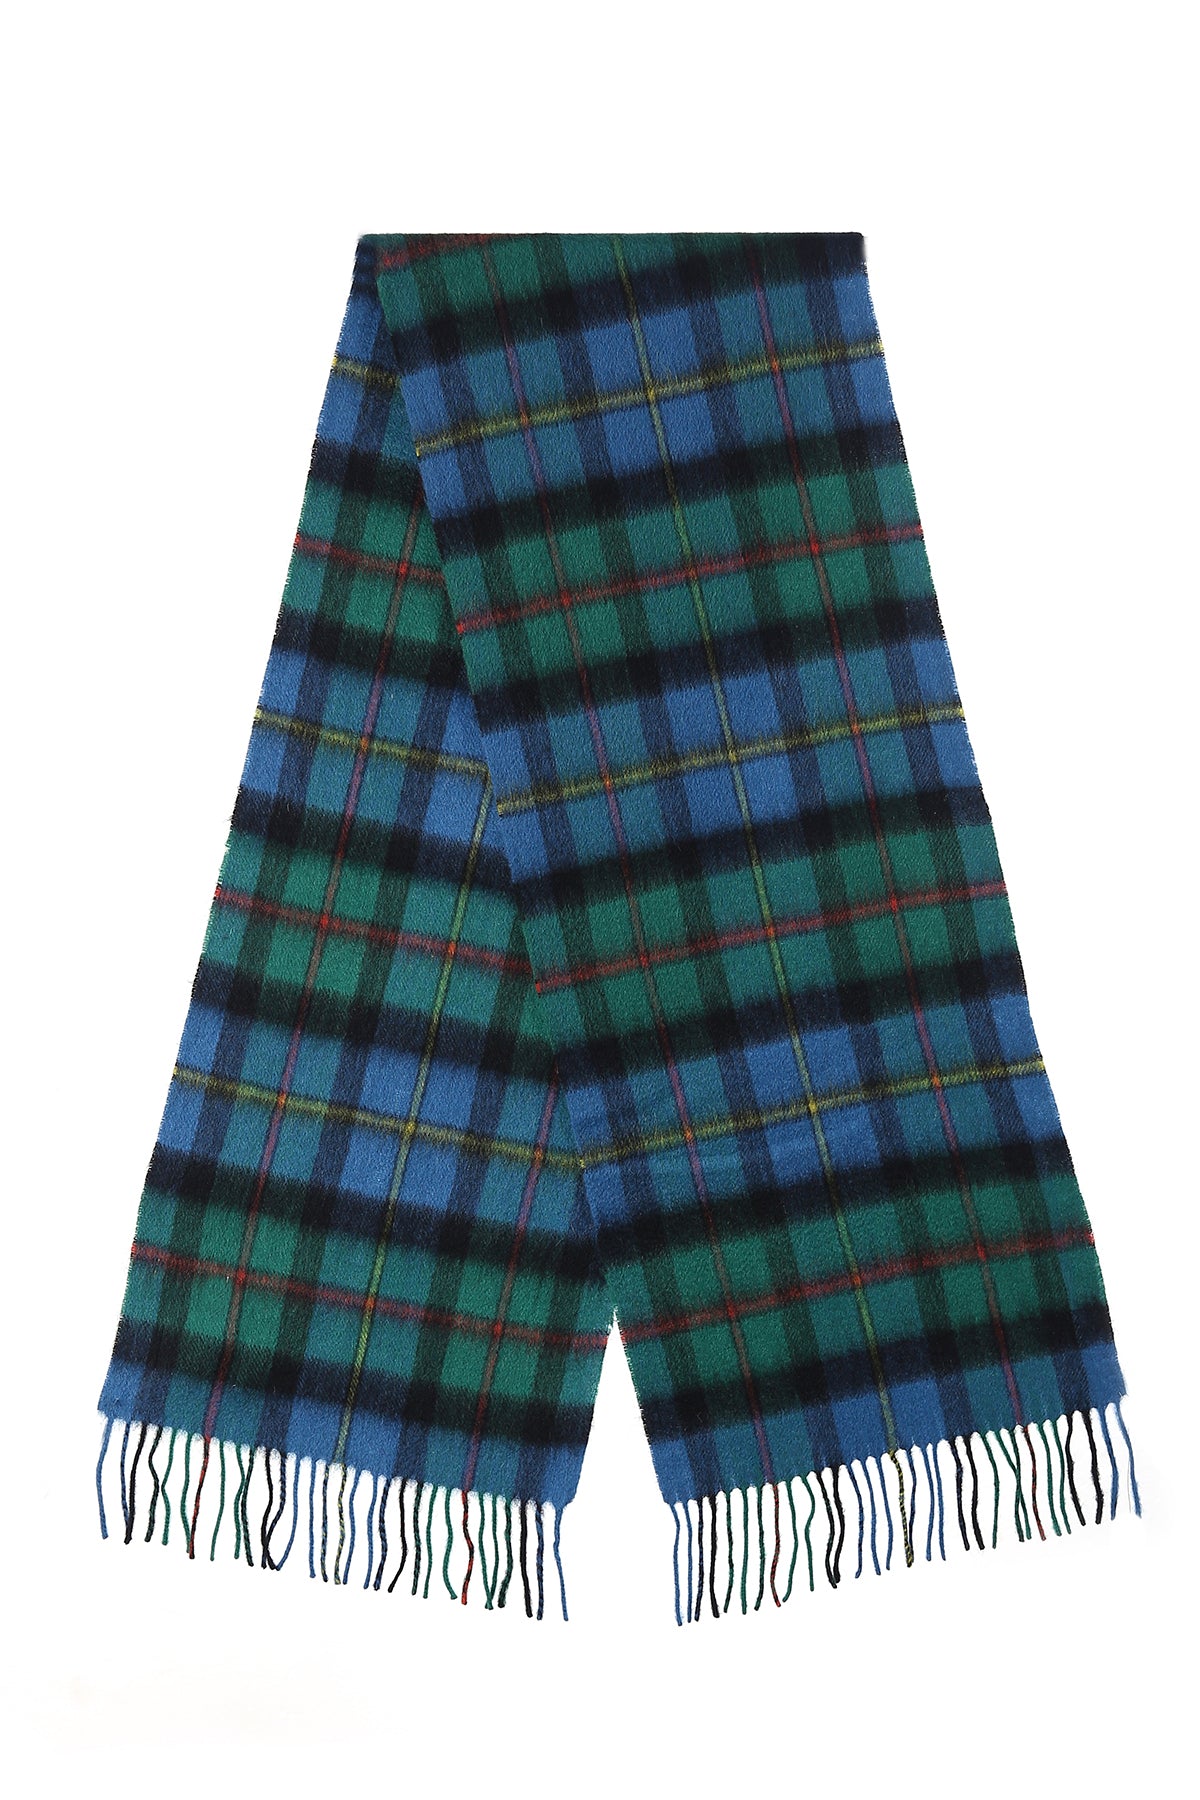 Scarves Macleod of Harris Ancient Clan 100% Pure Lambswool